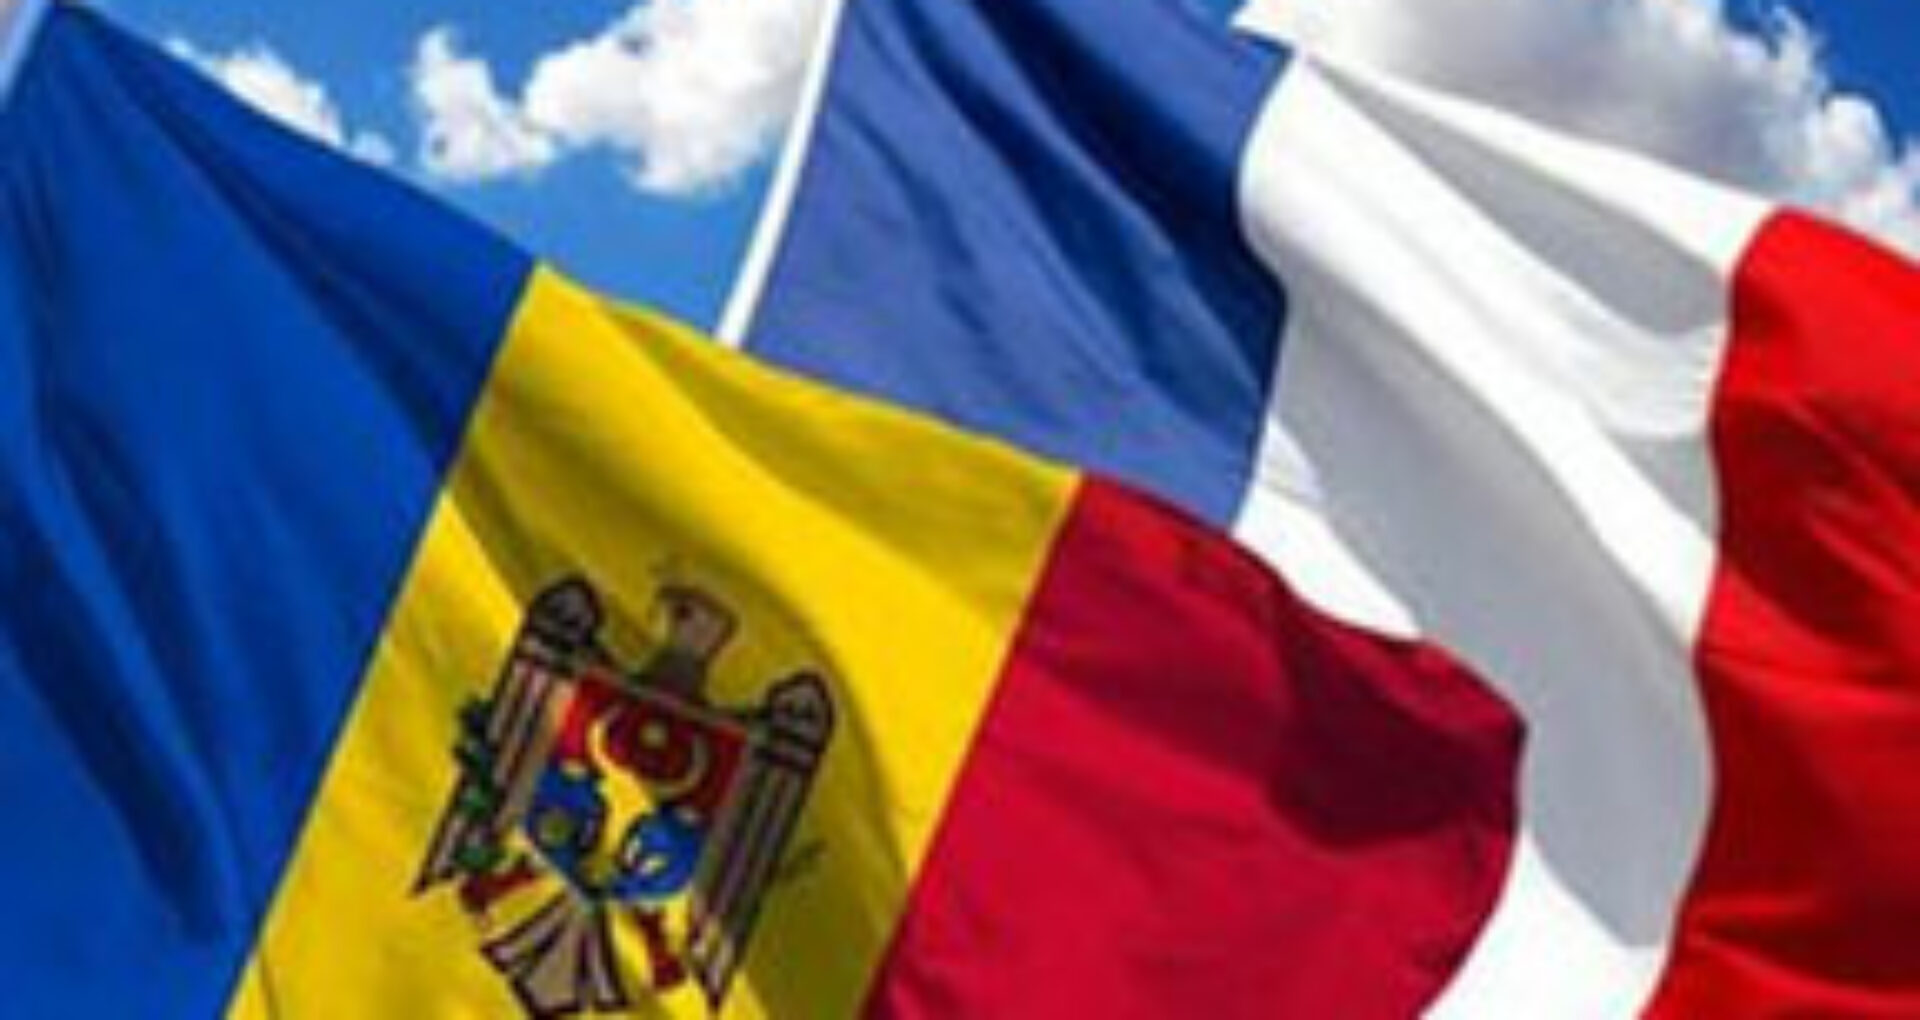 The Moldovan Citizens Who Worked in France Could Benefit From the Right to Pensions and Social Security